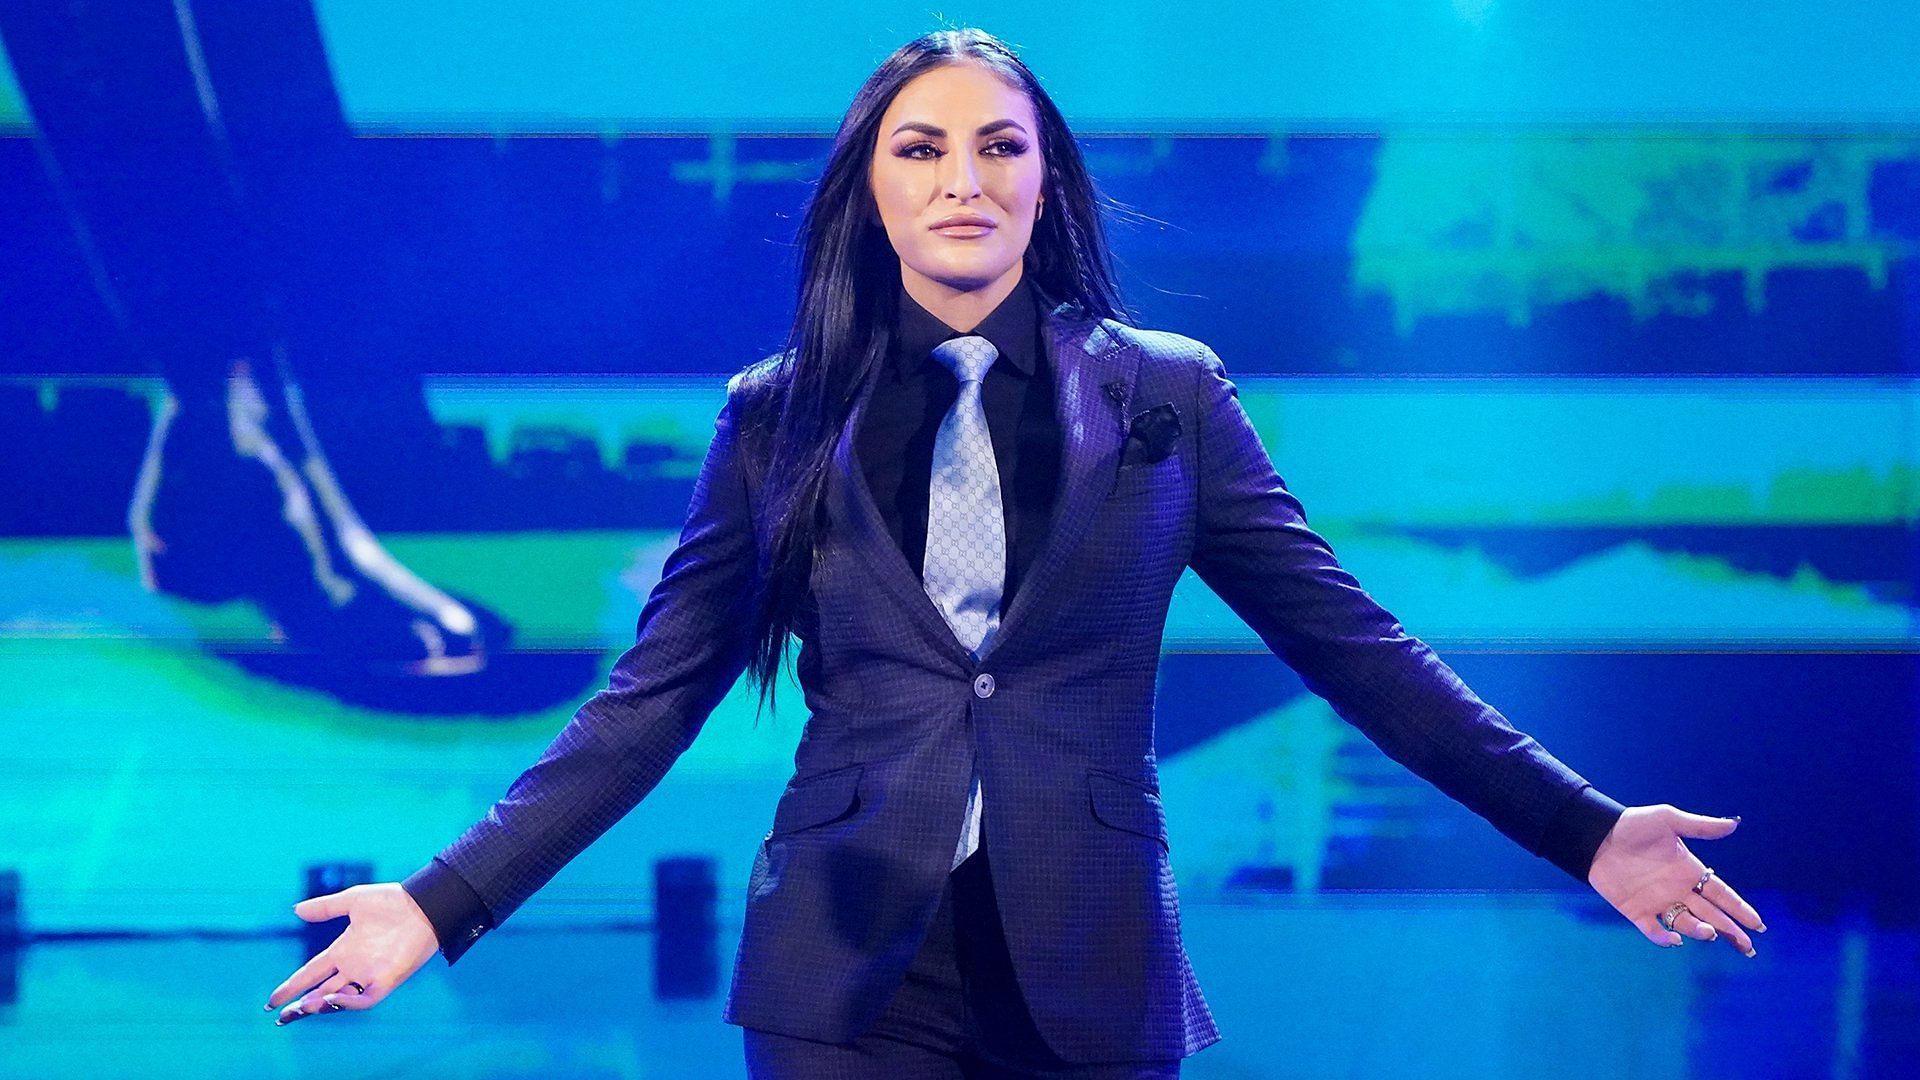 Sonya Deville is WWE&#039;s only current openly gay performer